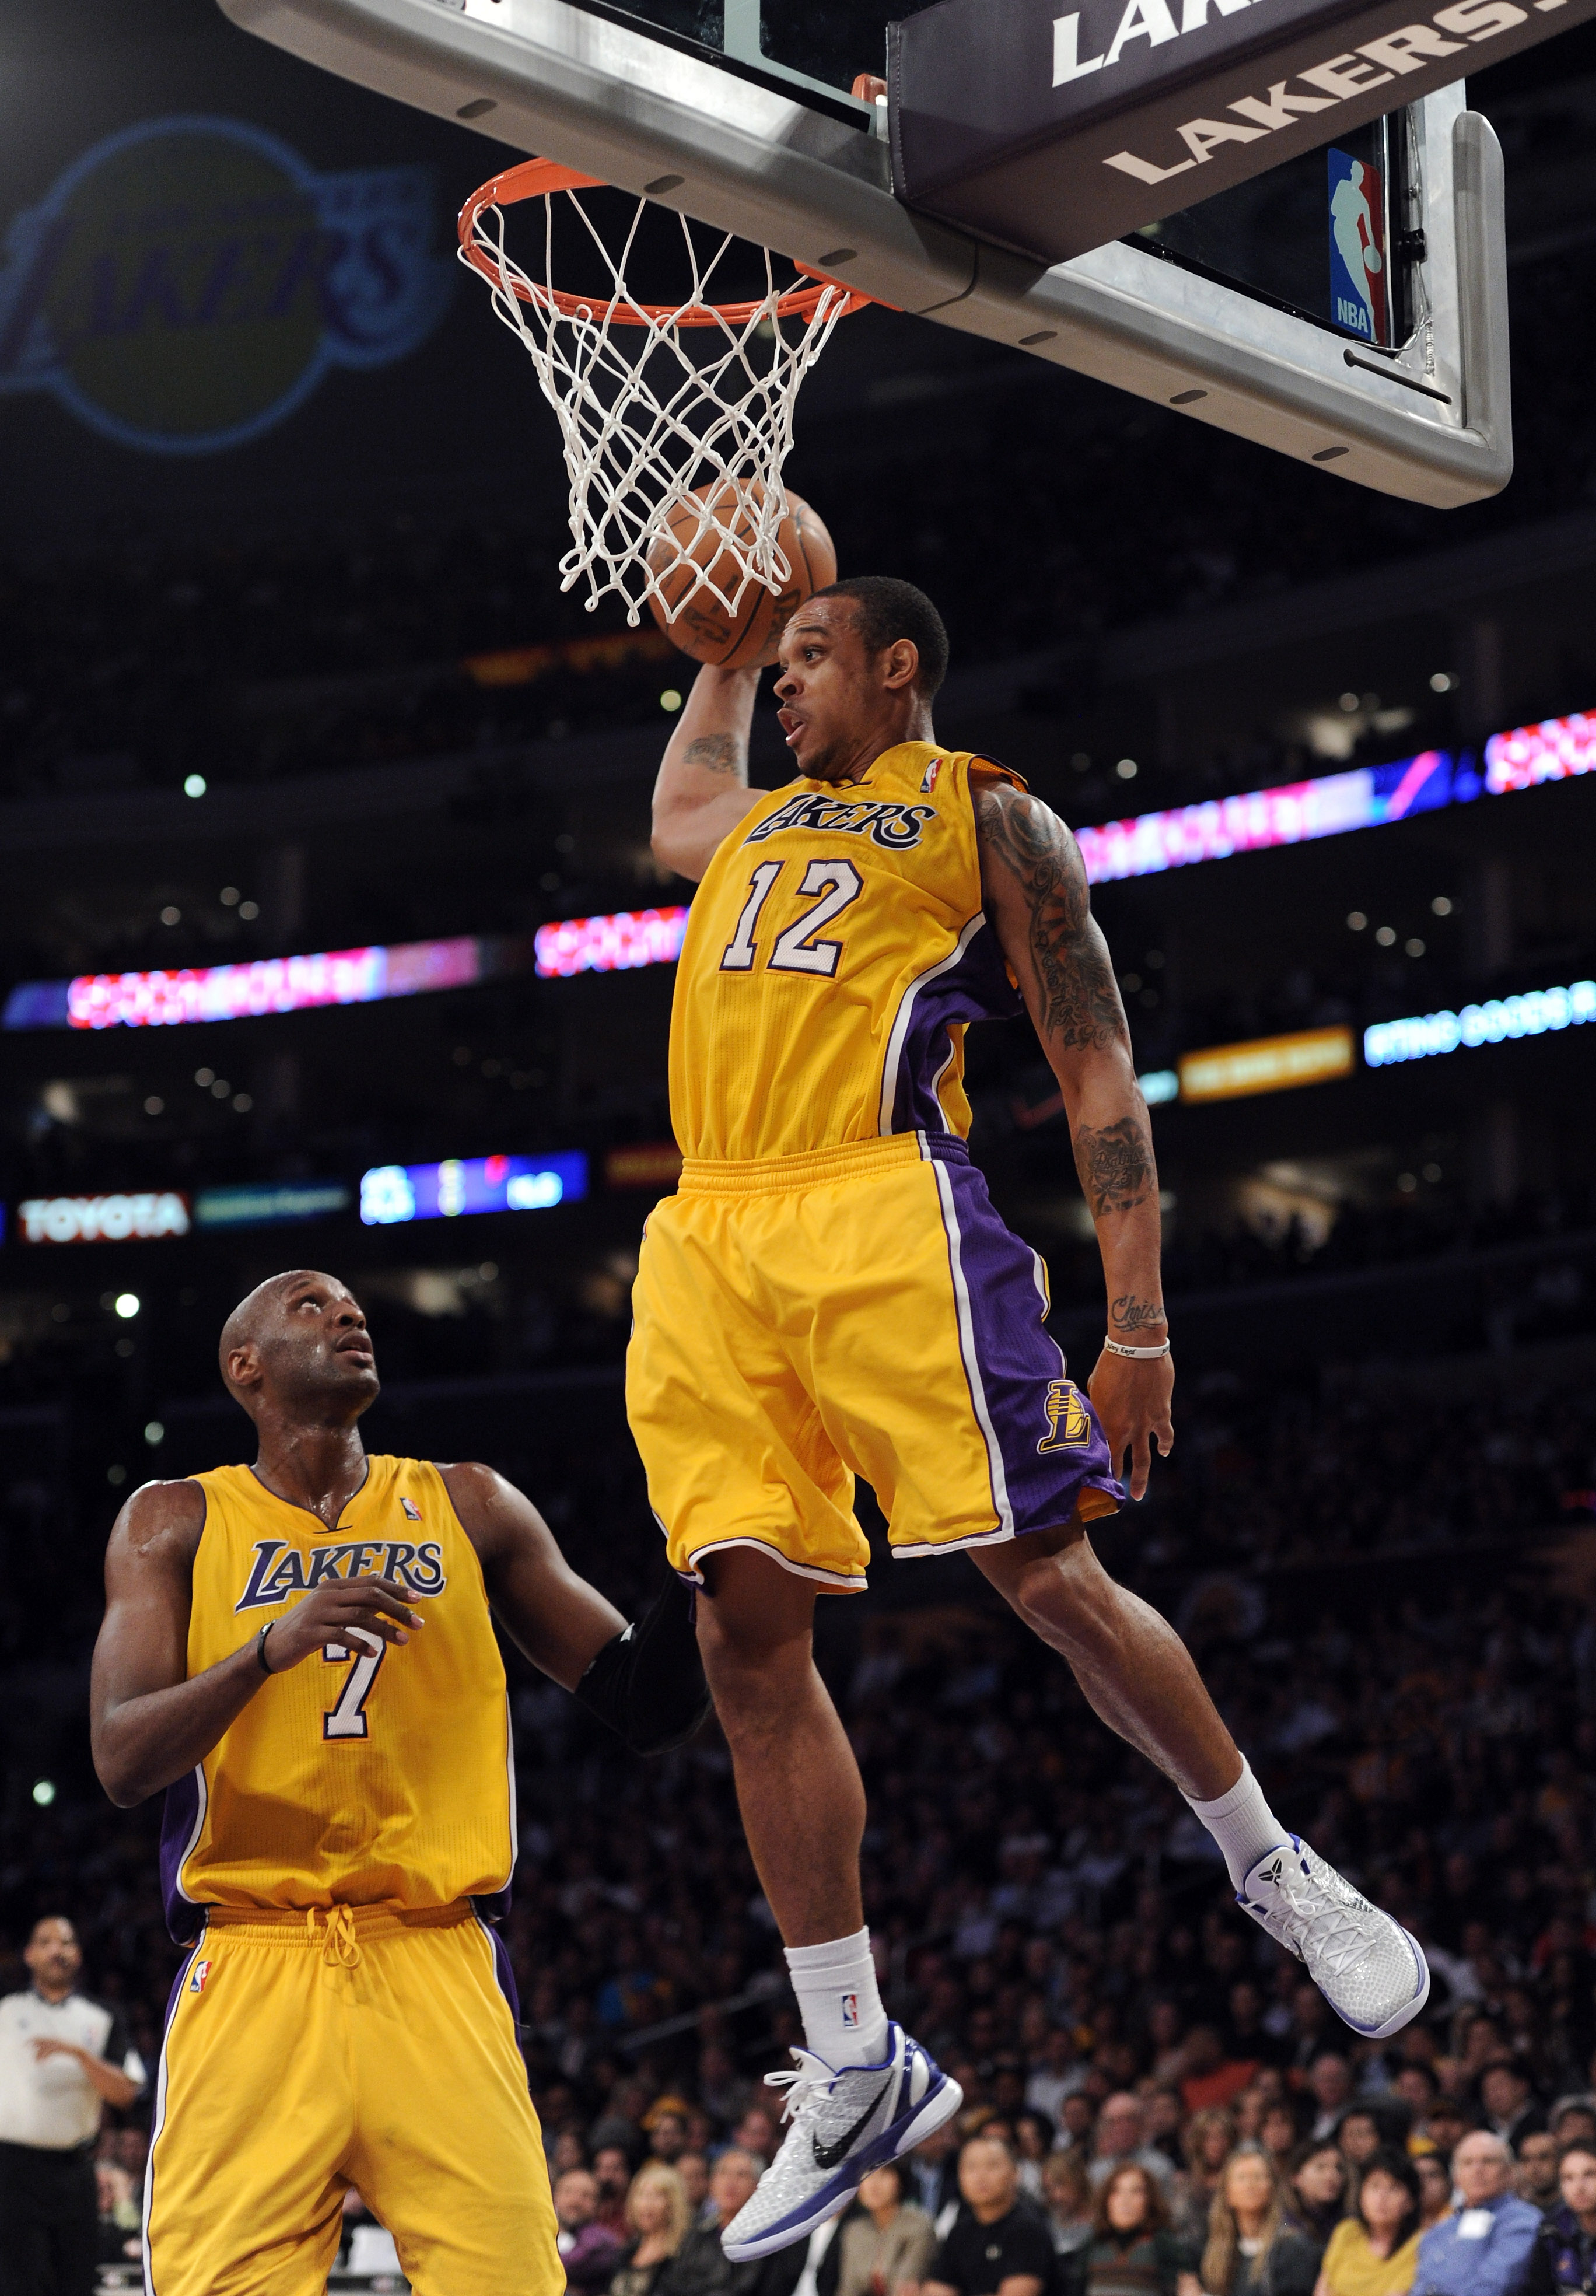 LA Lakers Lamar Odom & Shannon Brown Show Us Their Goods